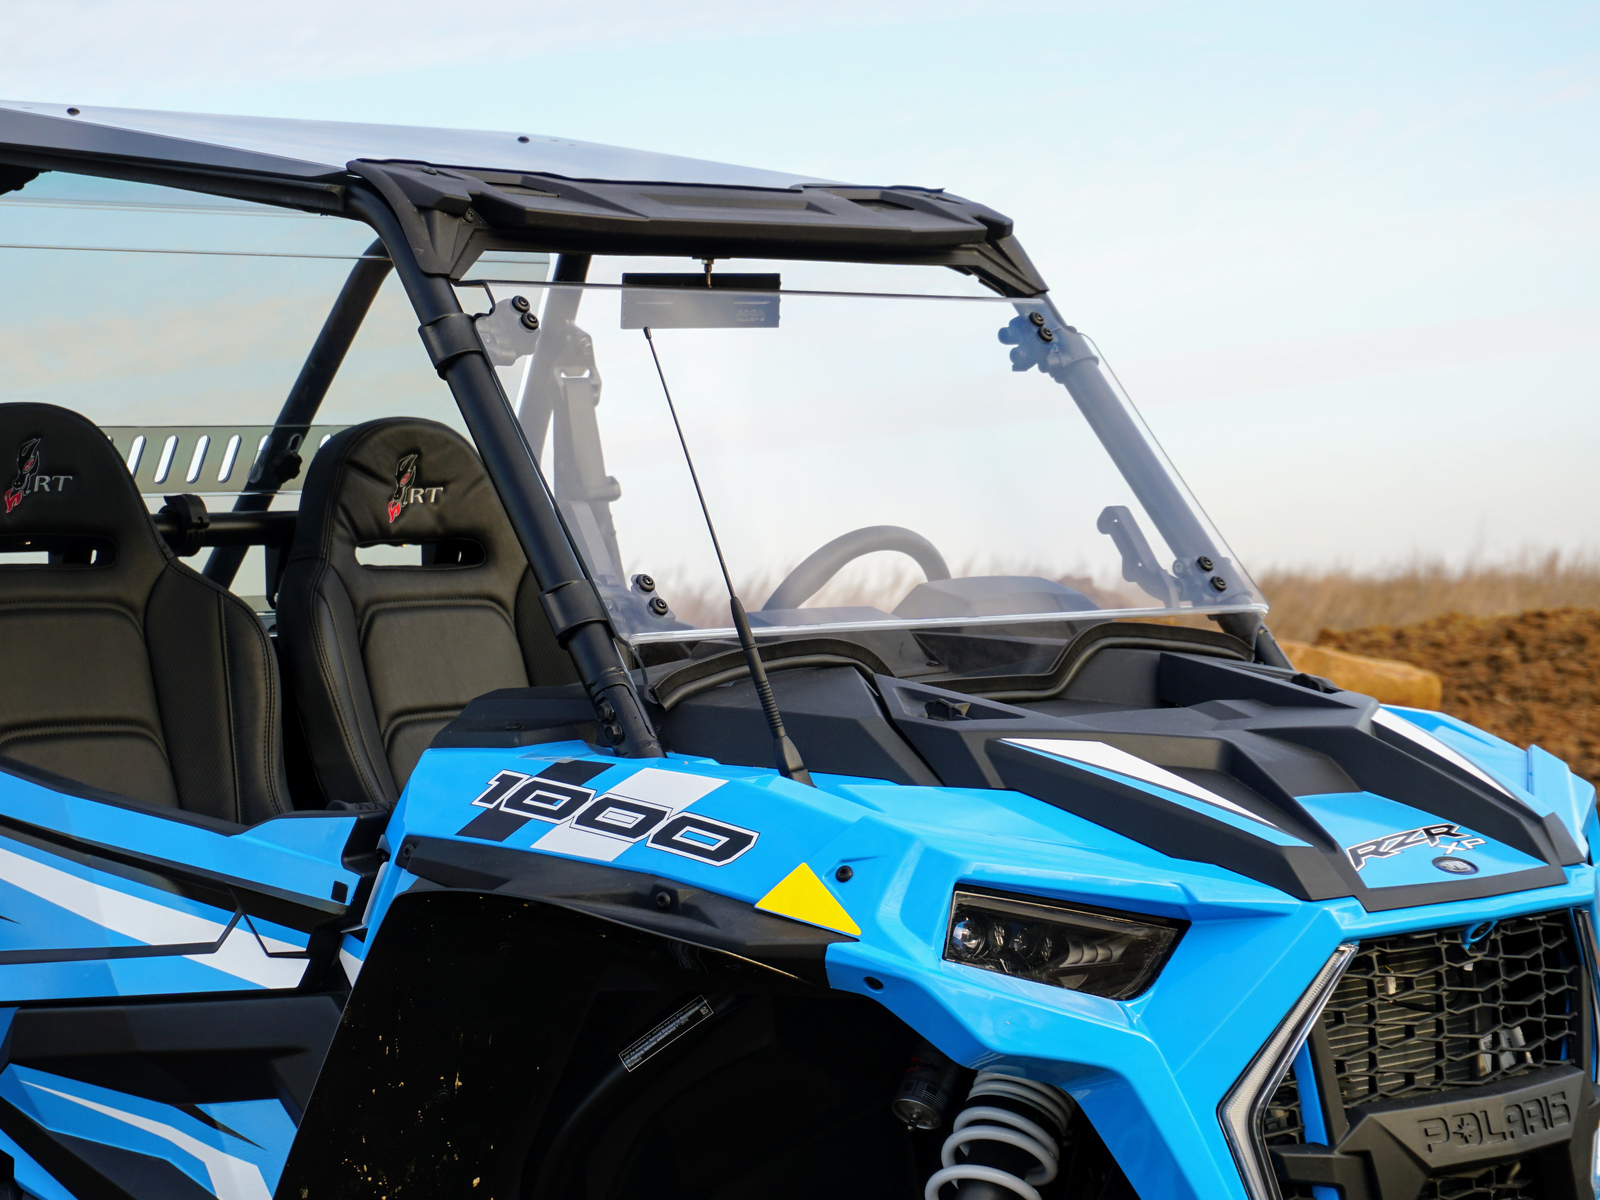 D-2 Full Tilting Windshield - For 2019 Polaris RZR 1000 XP - Click Image to Close